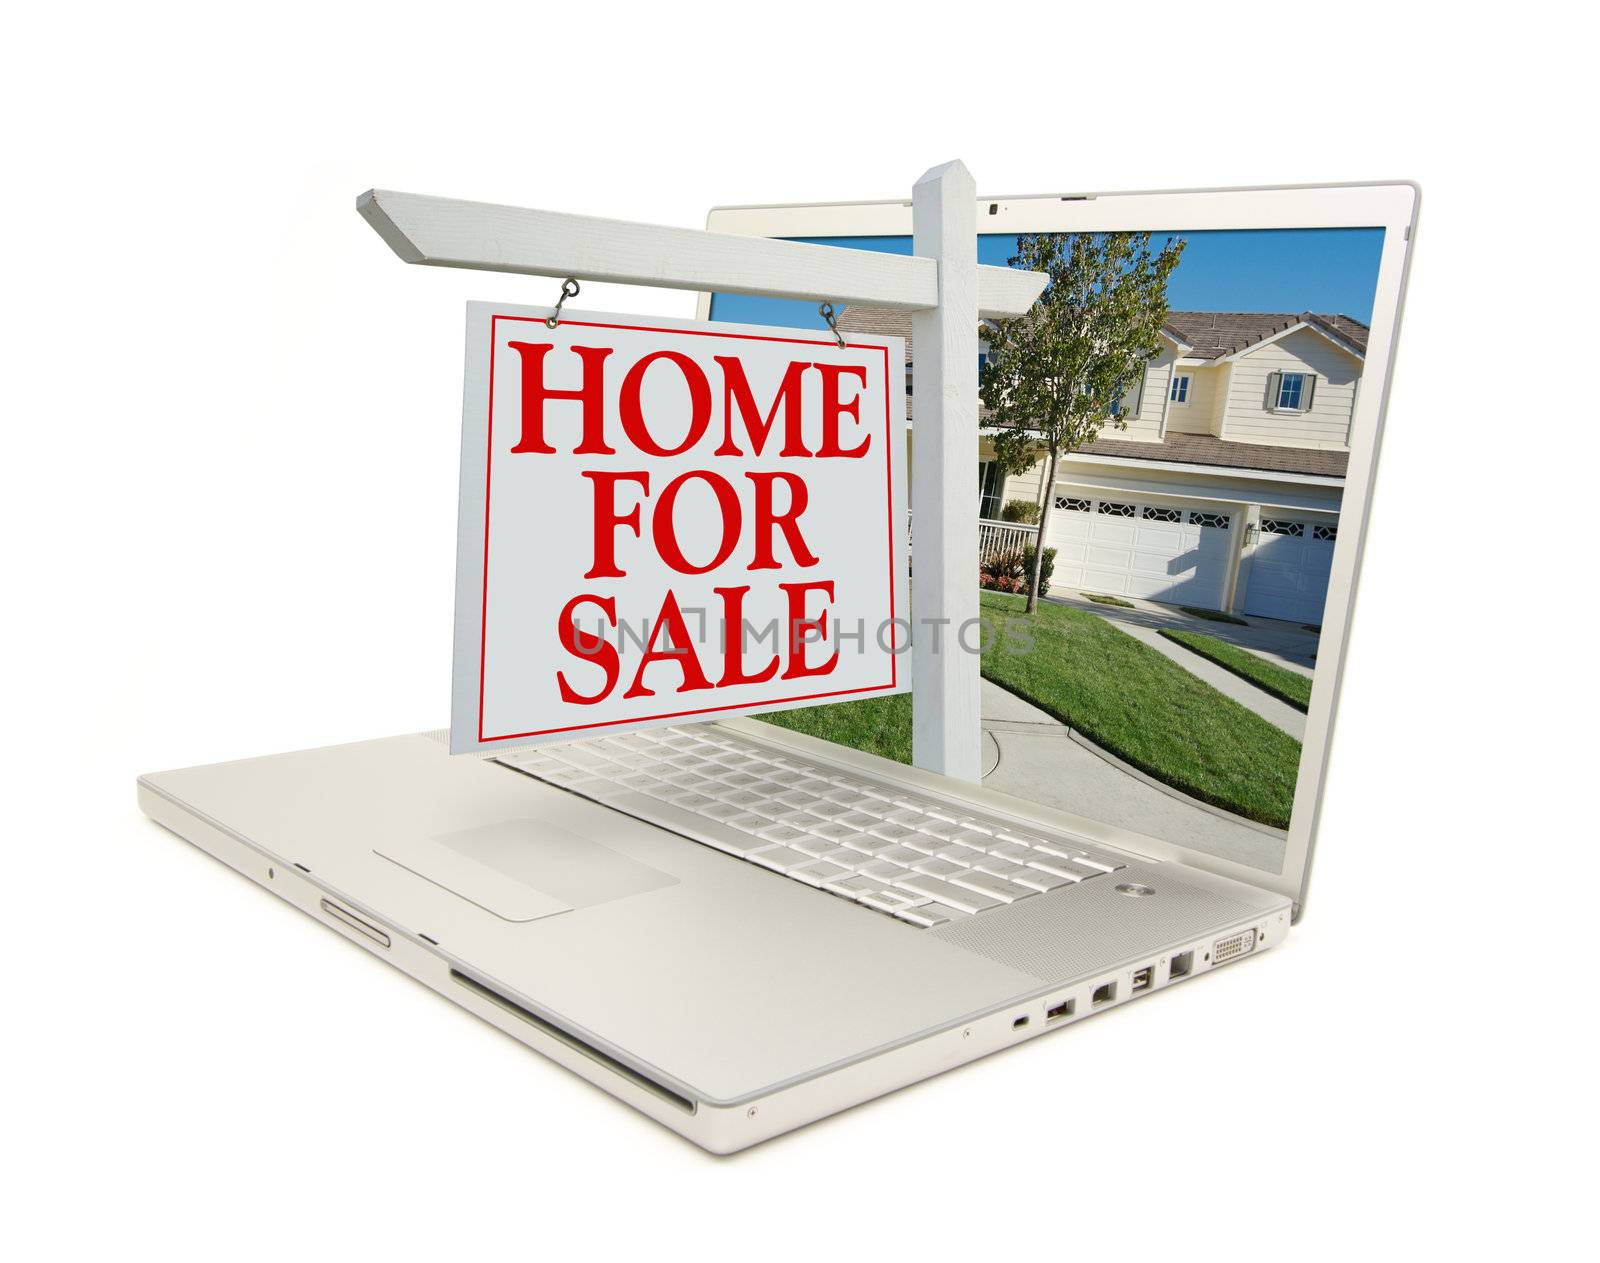 Home for Sale Sign & New Home on Laptop by Feverpitched